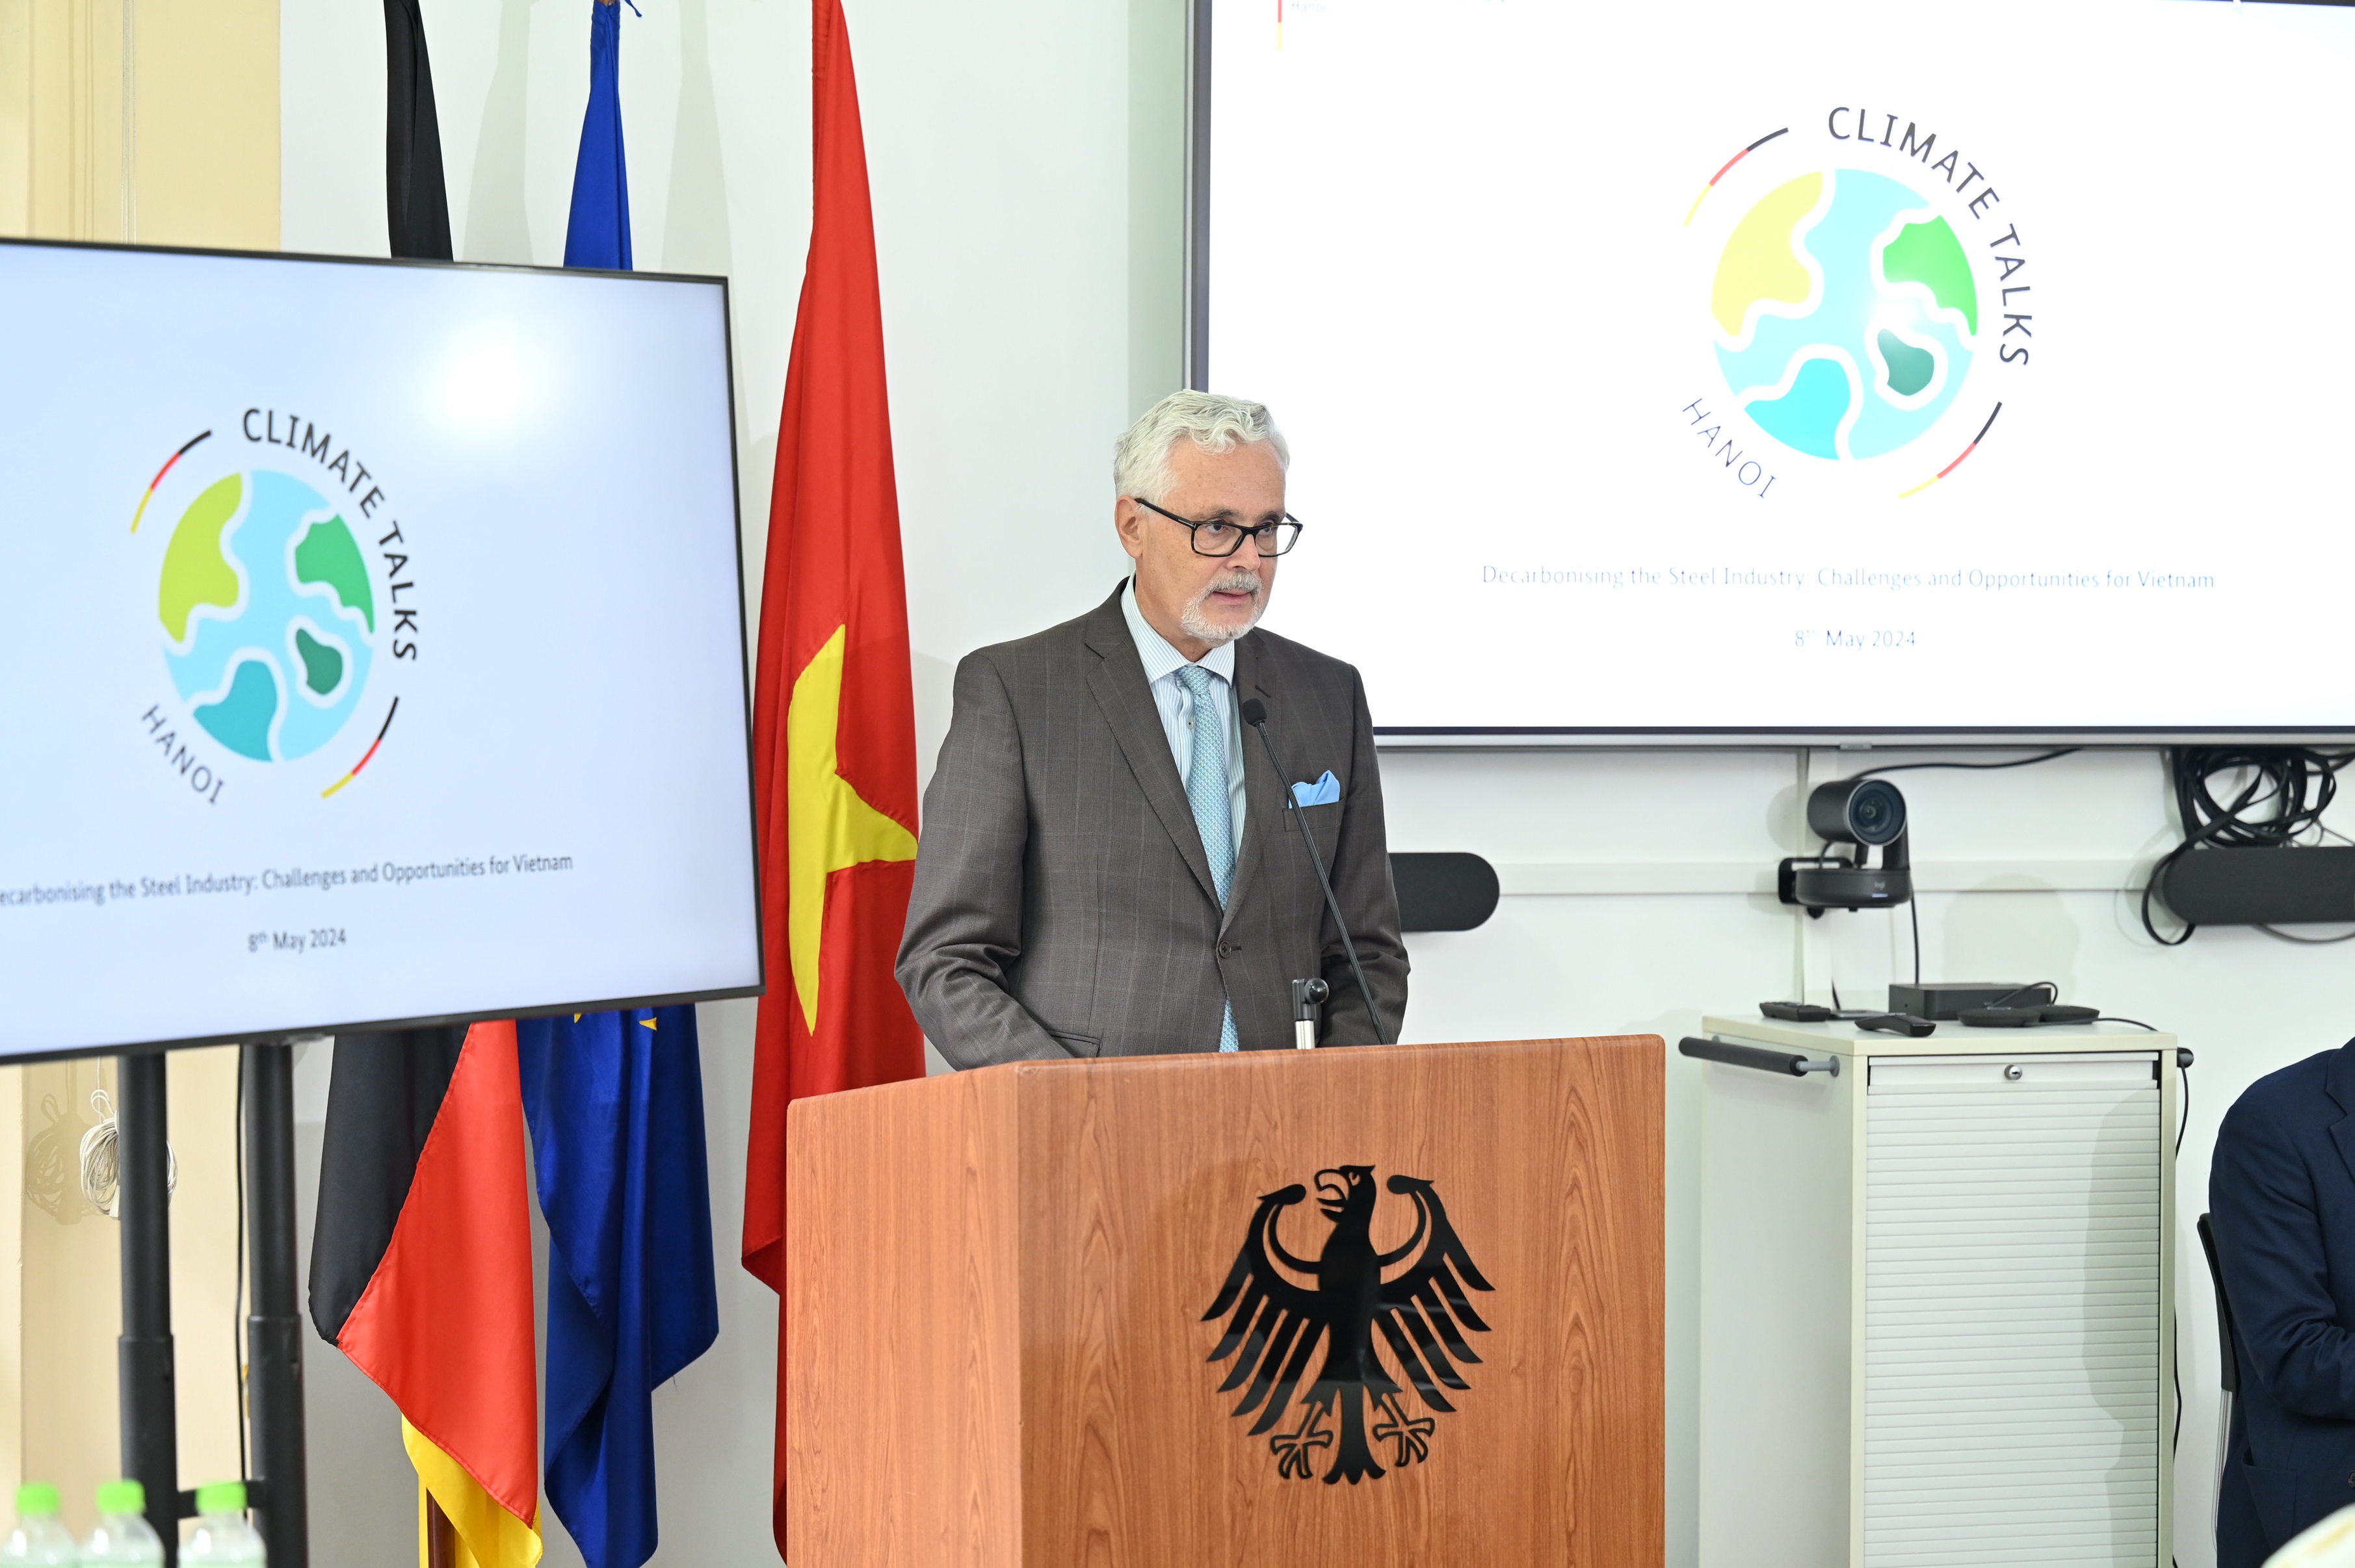 German Embassy launches platform for climate change issues in Vietnam